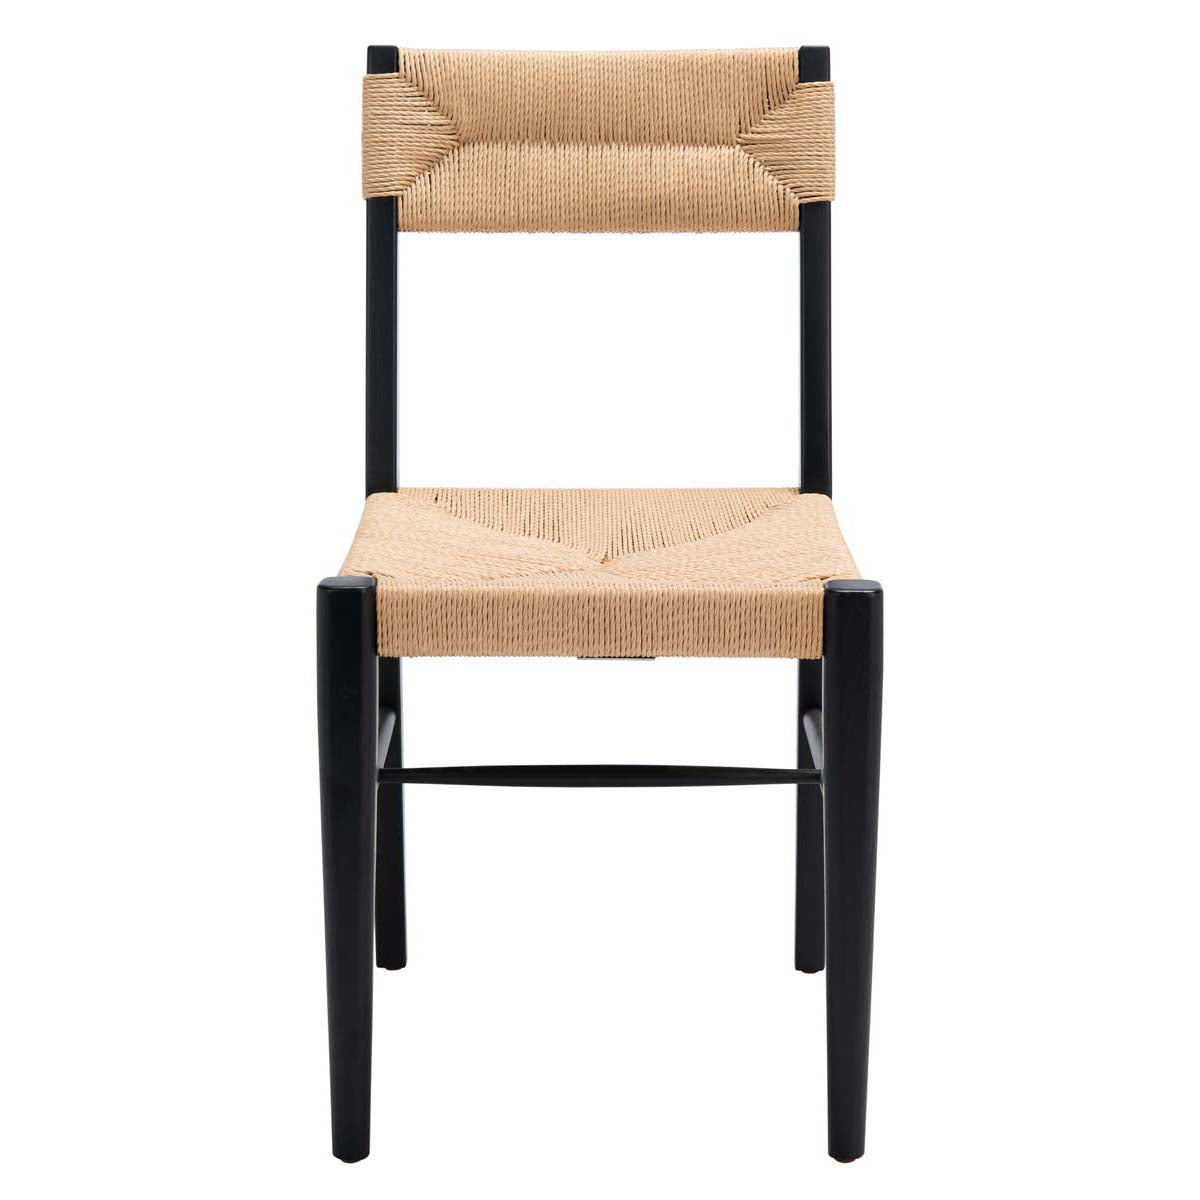 Safavieh Couture Cody Rattan Dining Chair - Black / Natural